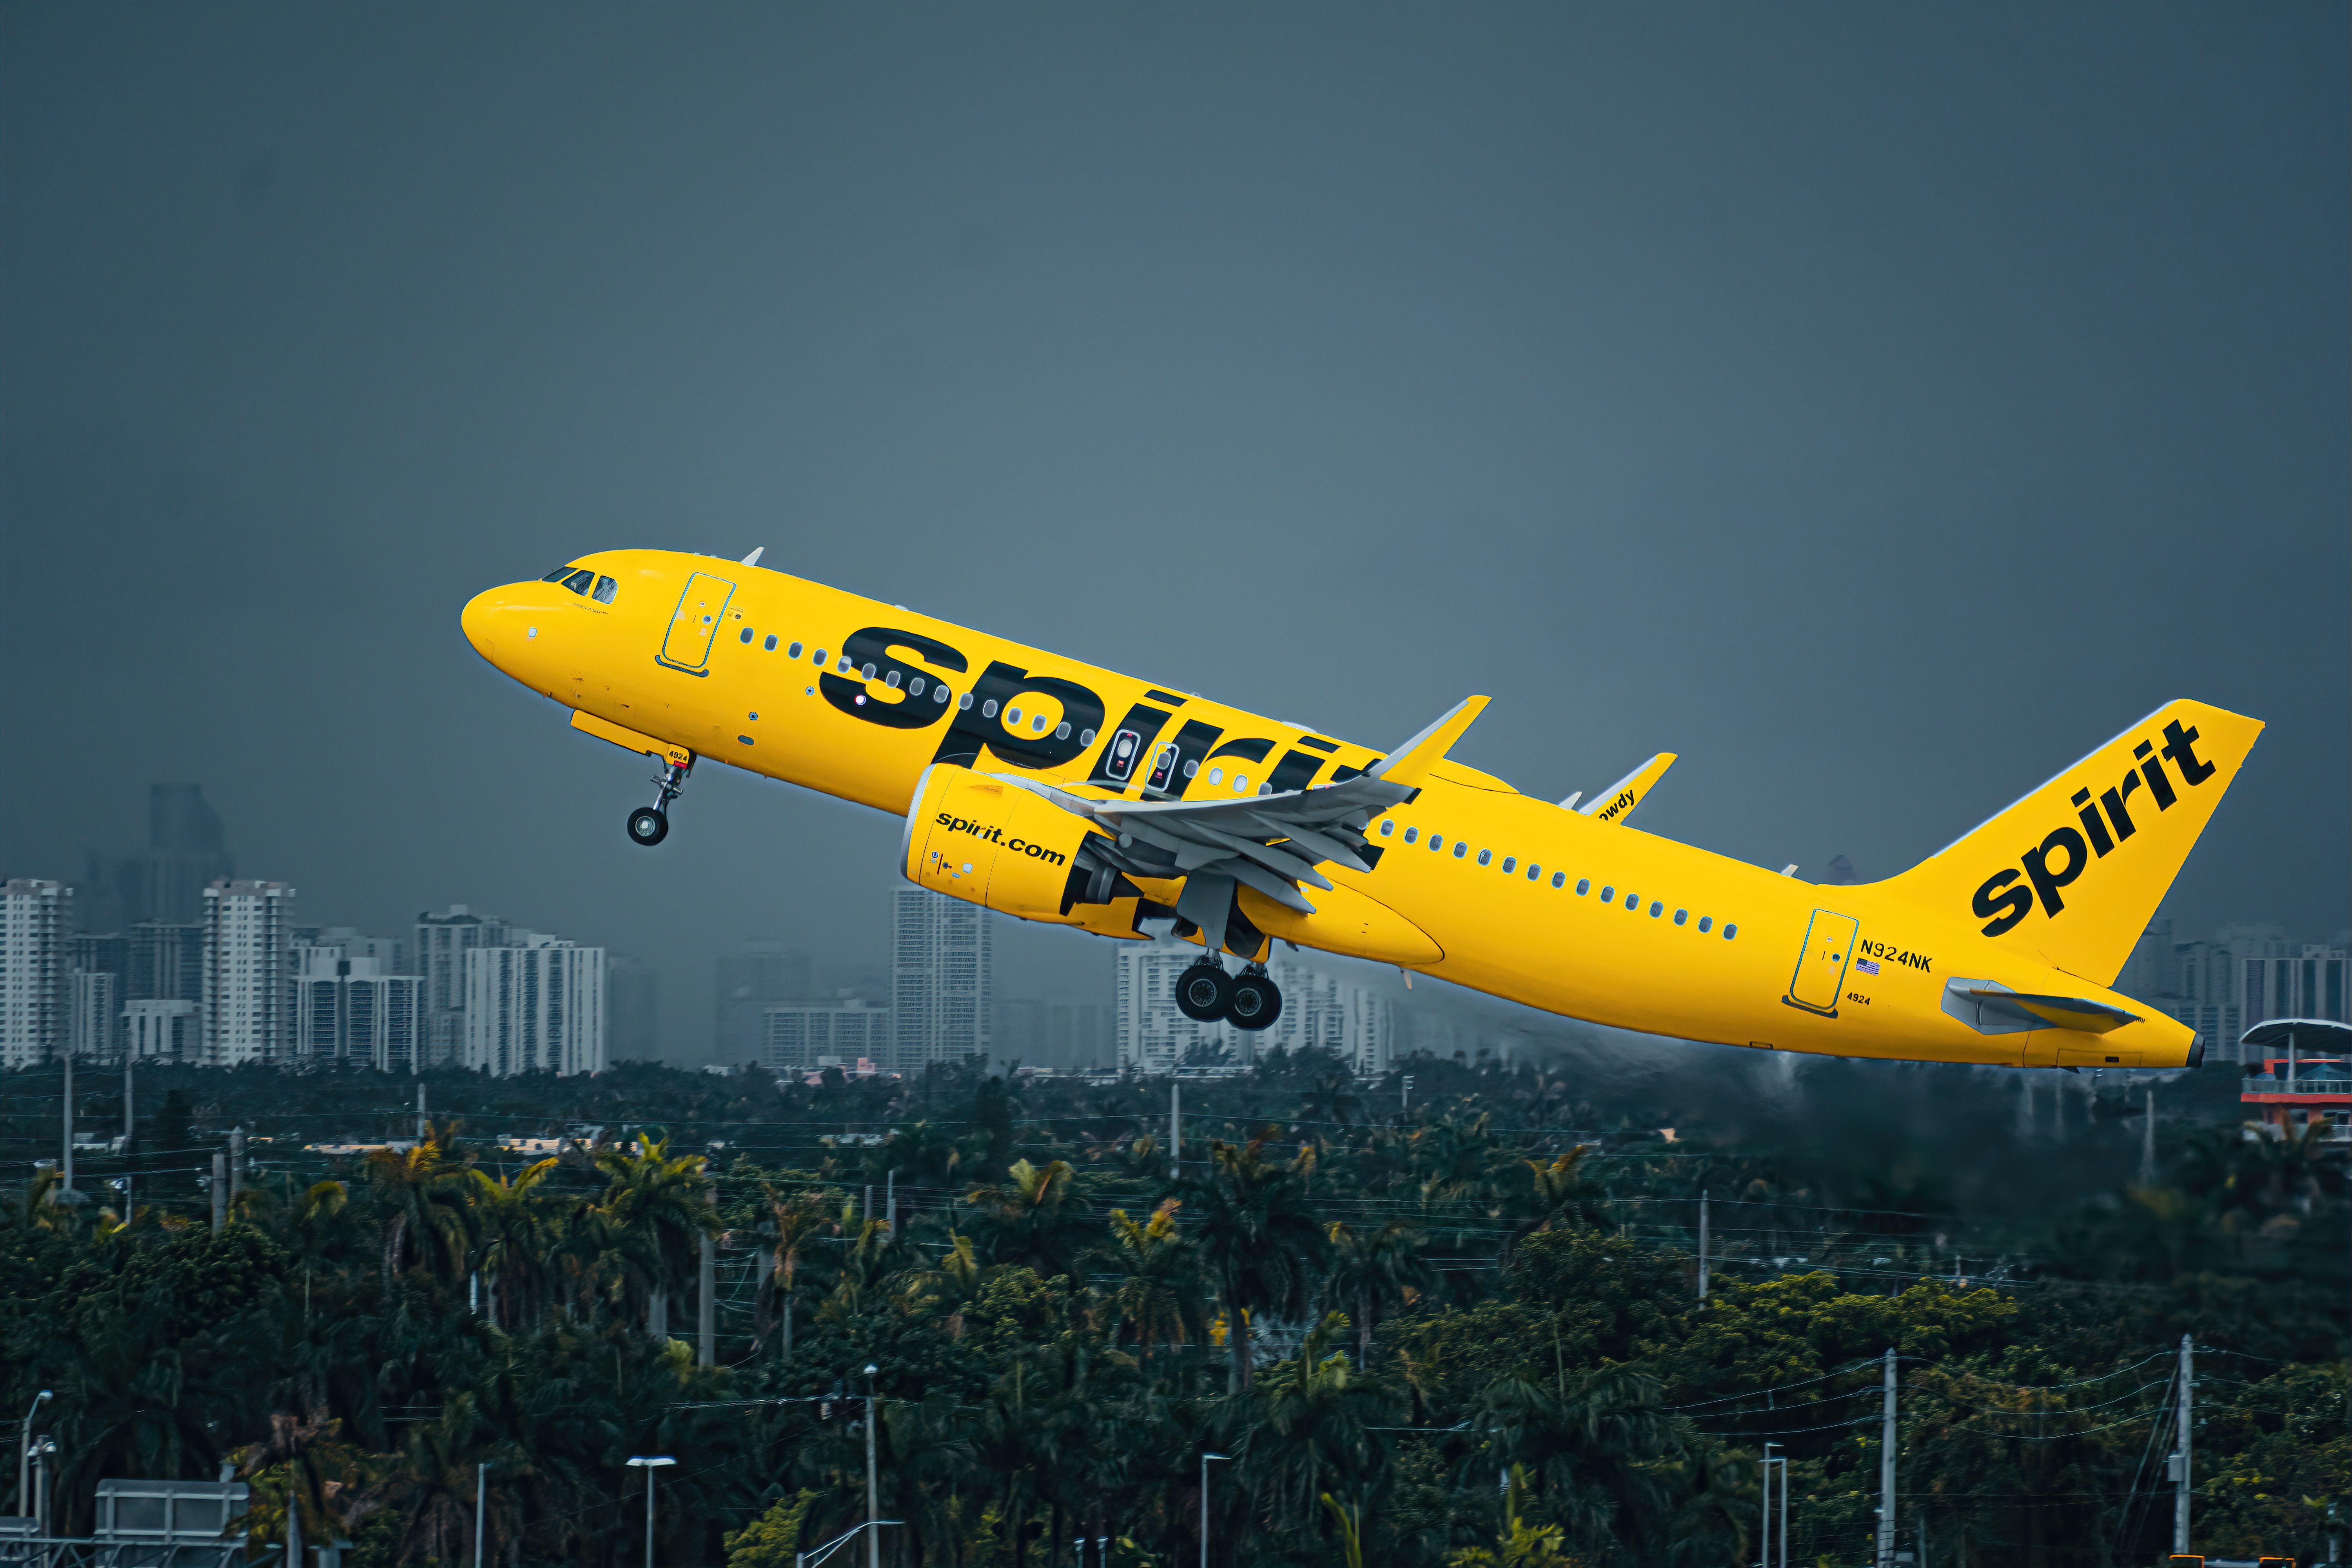 Spirit Airlines Airbus A320NEO taking off from Fort Lauderdale-Hollywood International Airport.